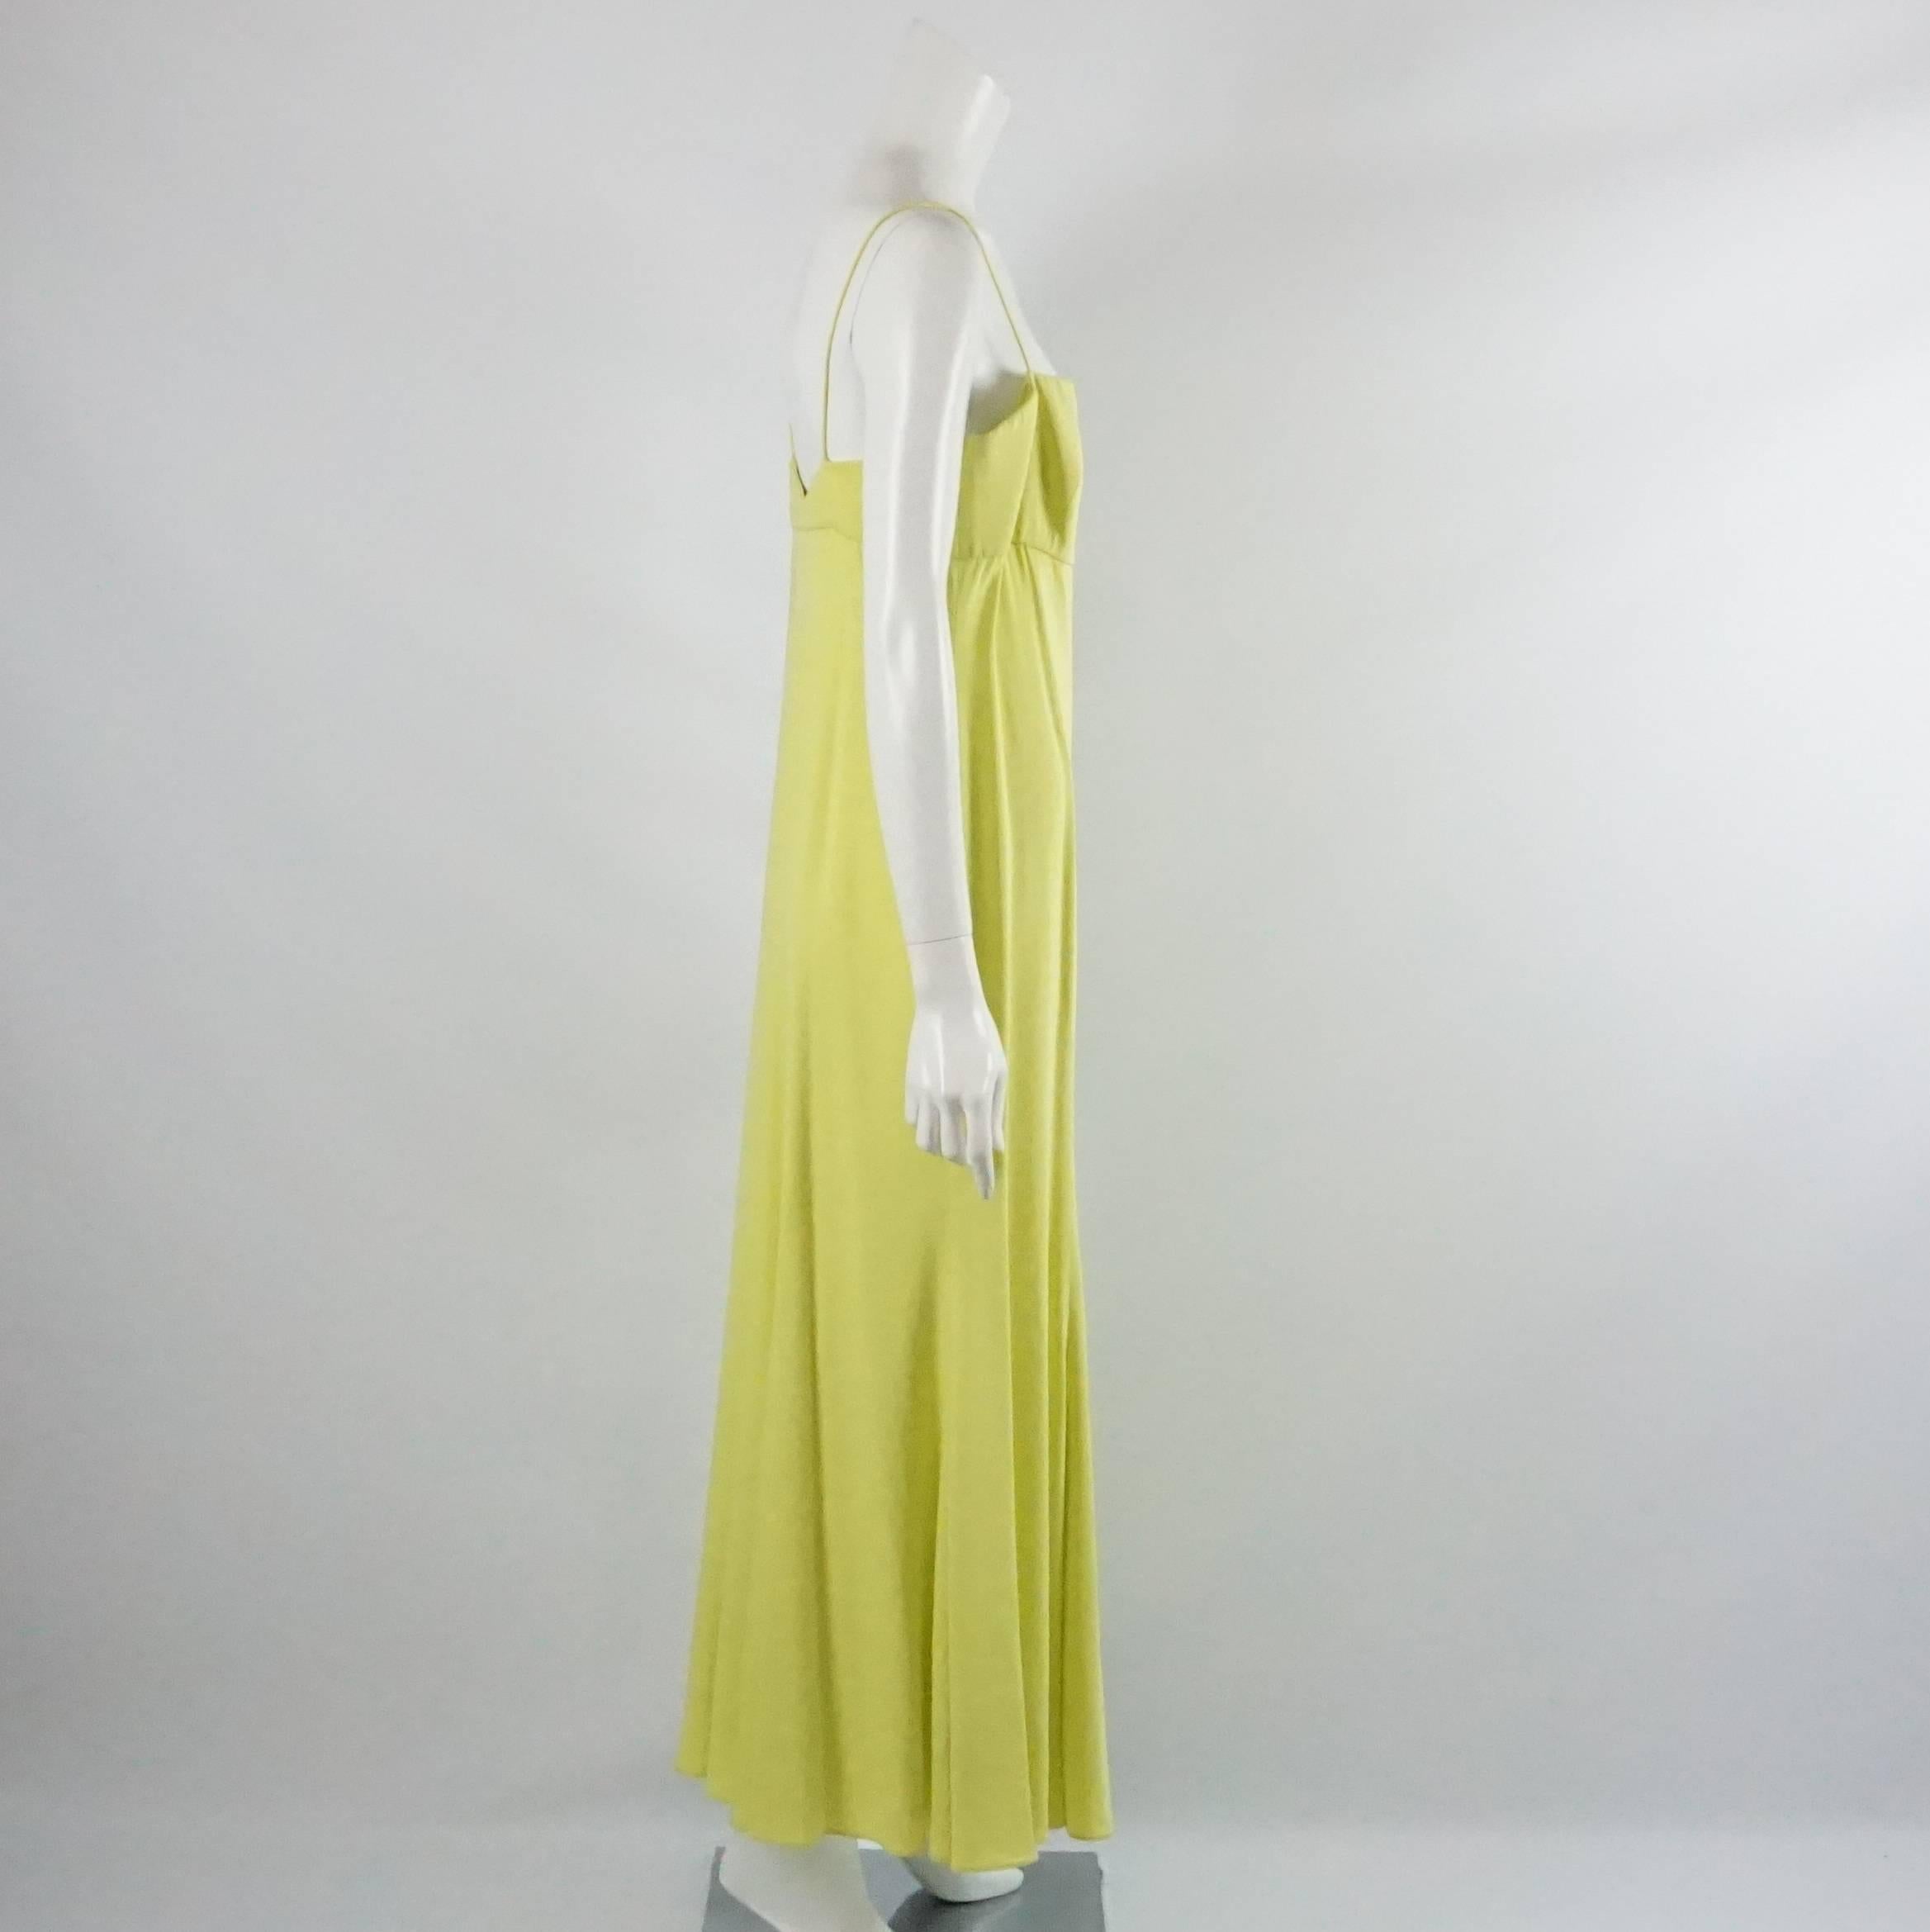 This Giorgio Armani gown is chartreuse silk. It has spaghetti straps and pleating on the bottom. This gown is in fair condition with some staining and runs in the fabric. Size 46. 

Measurements
Bust: 35